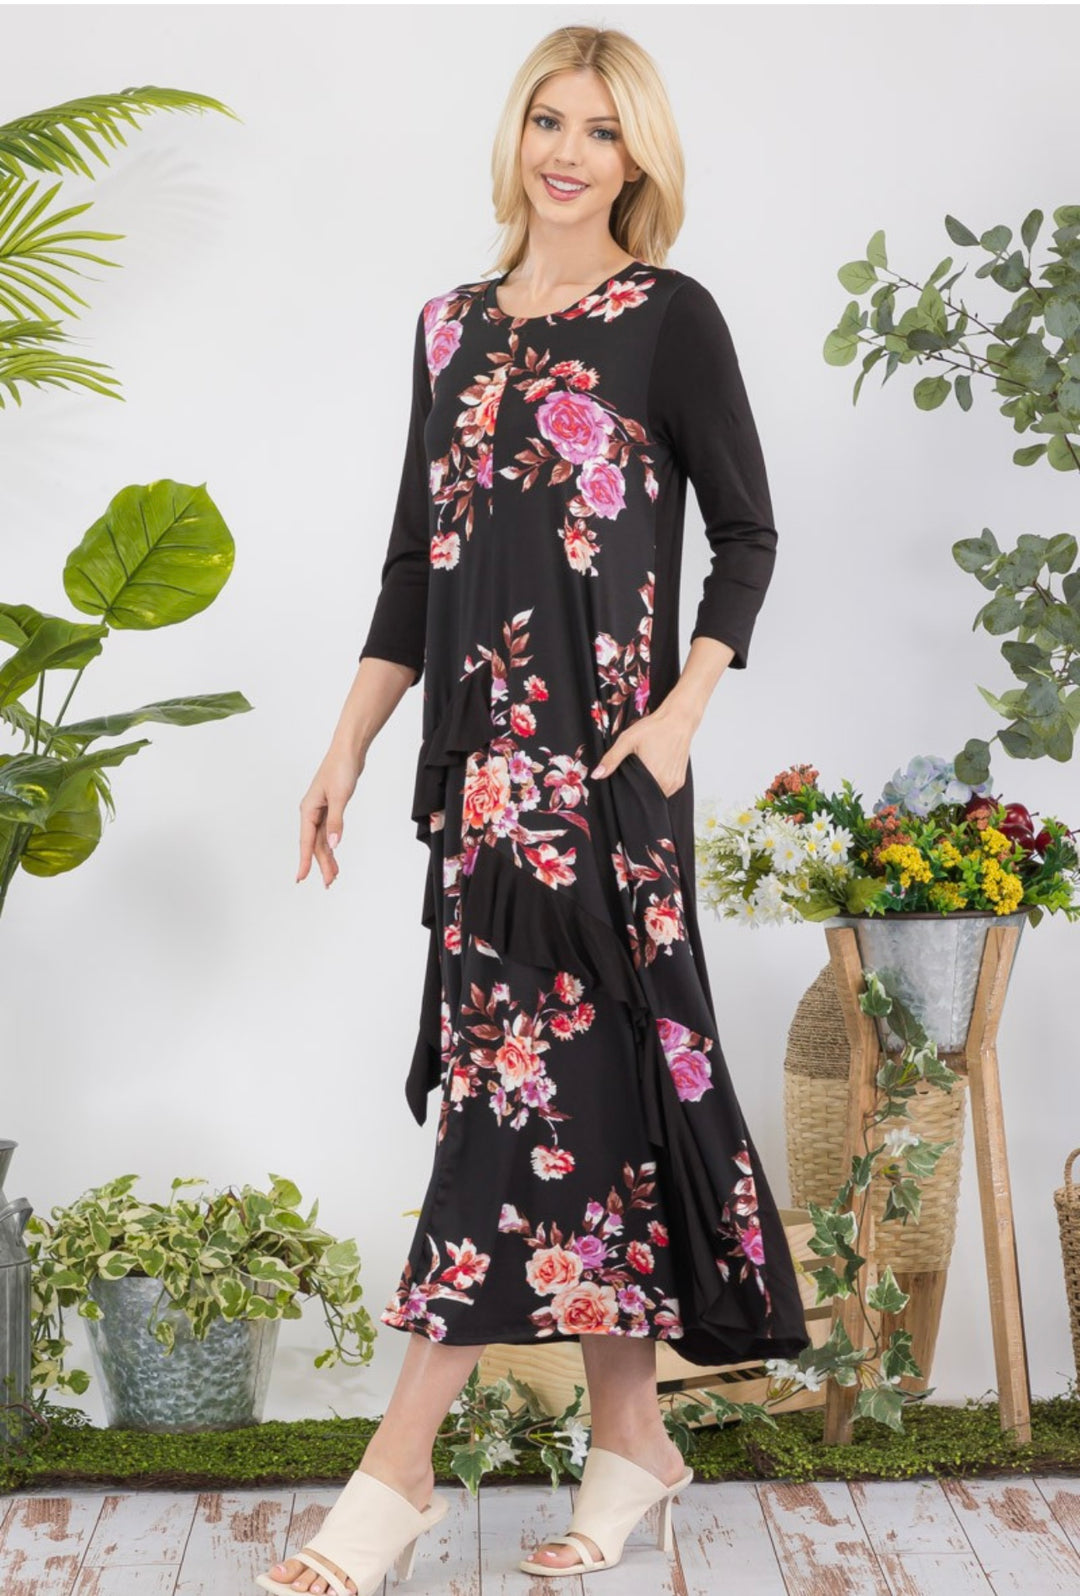 Celeste Floral with Black Contrast Modest Dress with Ruffle